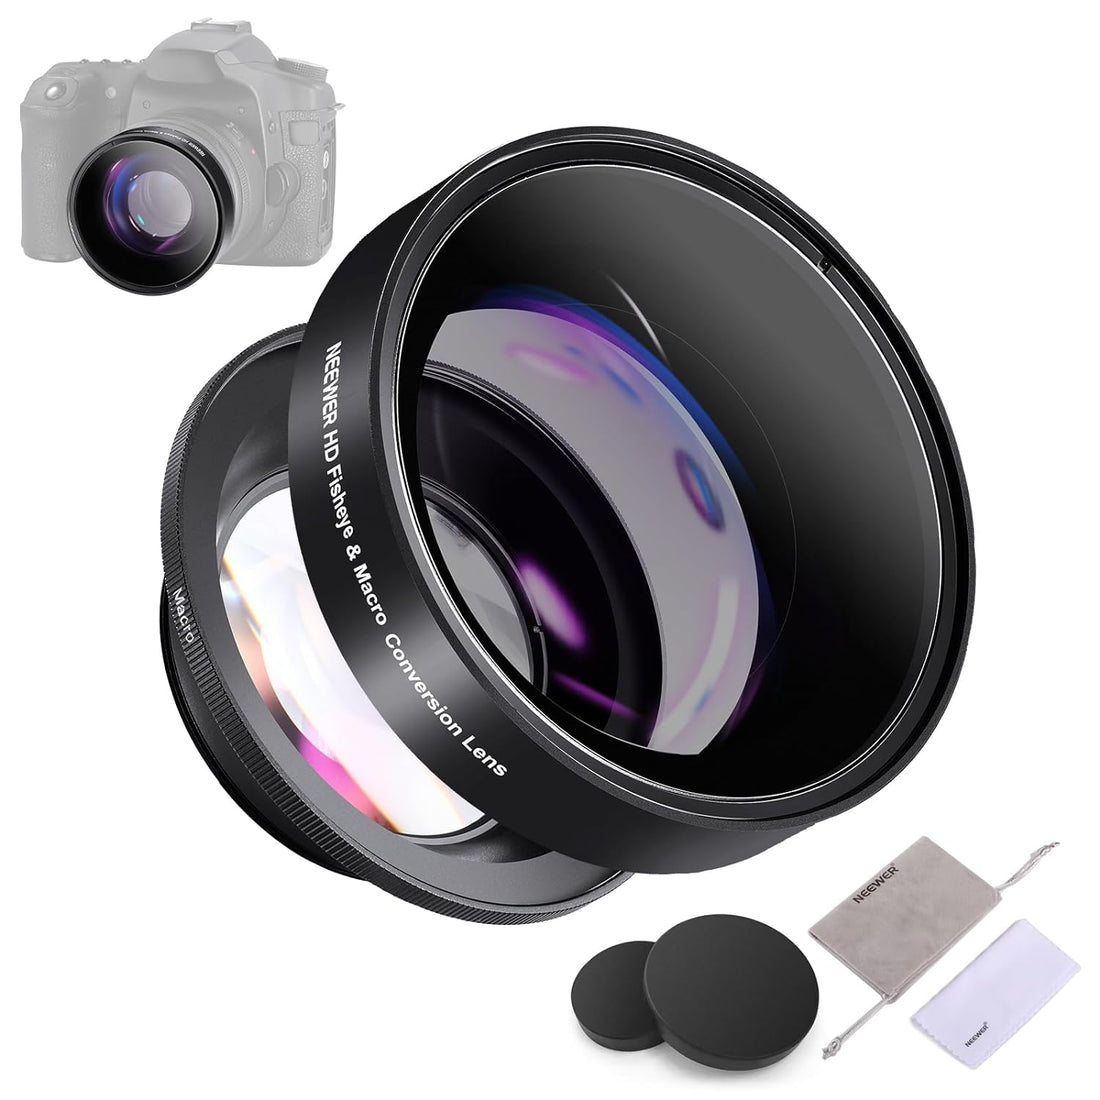 NEEWER 52mm 0.43X HD 2 in 1 Wide Angle & Macro Lens, Ultra Wide Angle Lens with 18mm Focal Length Compatible with Canon T7 M50 90D M6 MarkII Nikon D780 D850 Z50 Z fc Fujifilm X-T4 X-T3 X-T30, LS-20